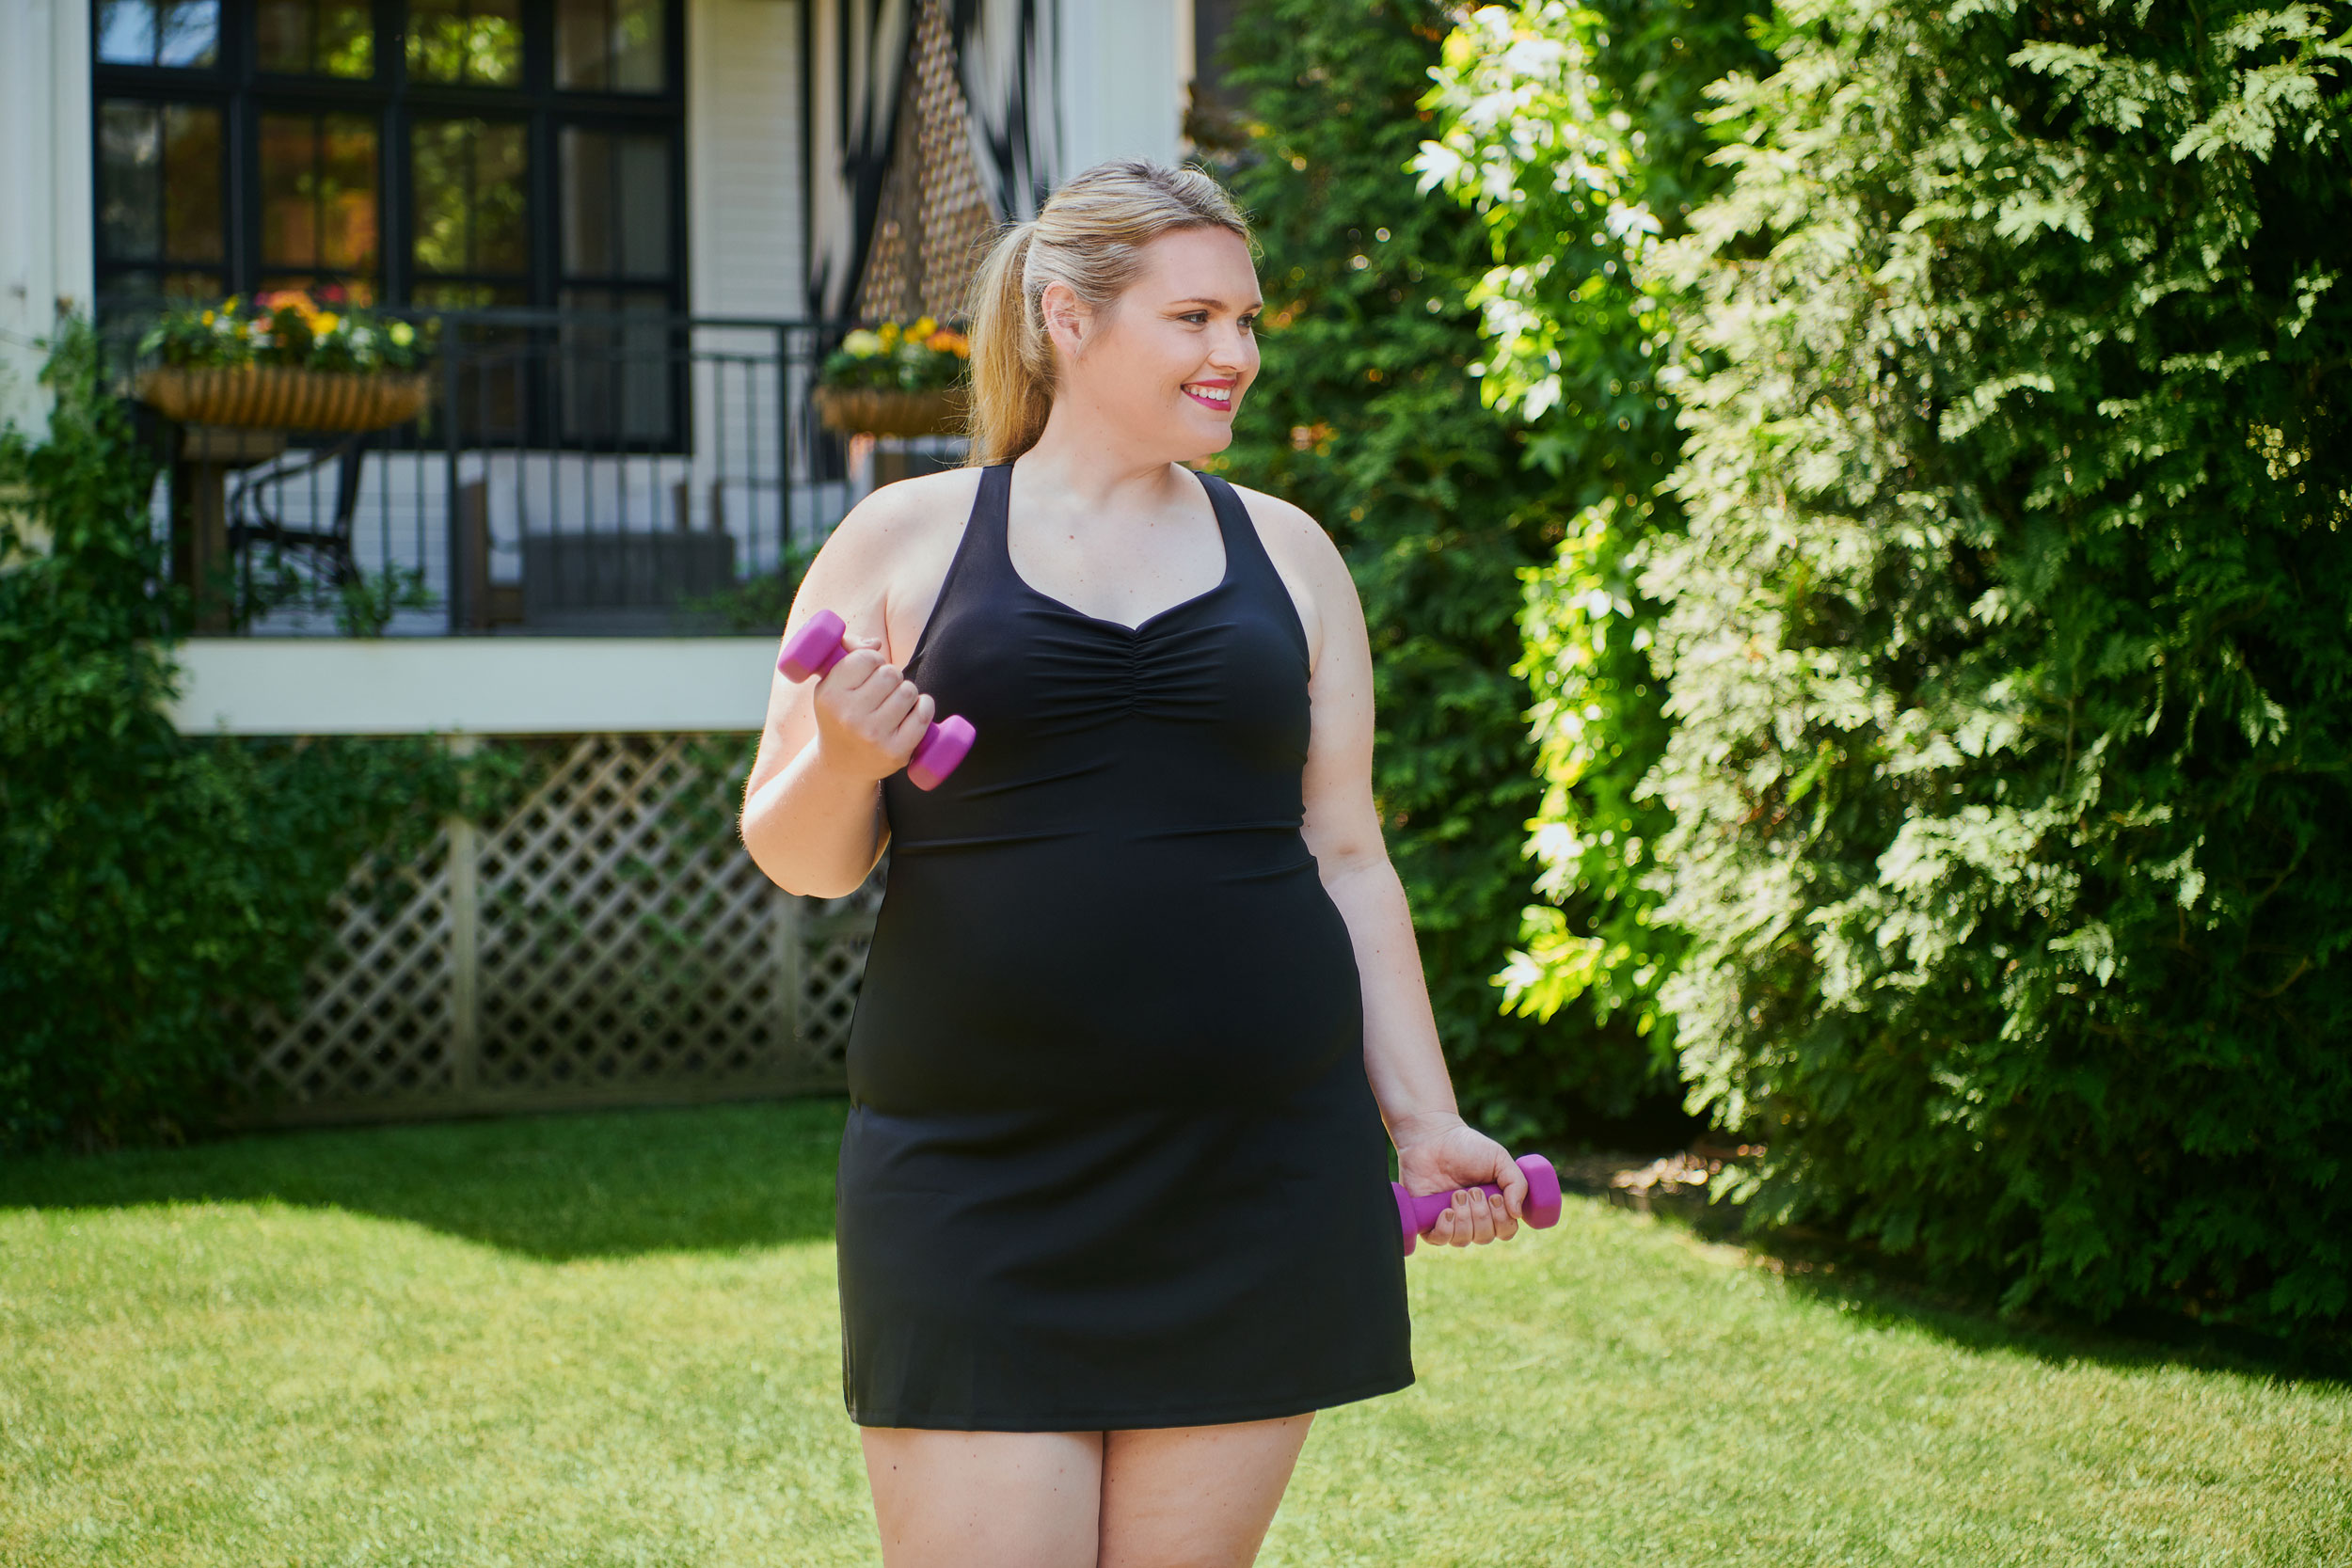 Plus-sized woman outside in black athleisure dress holding hand weights